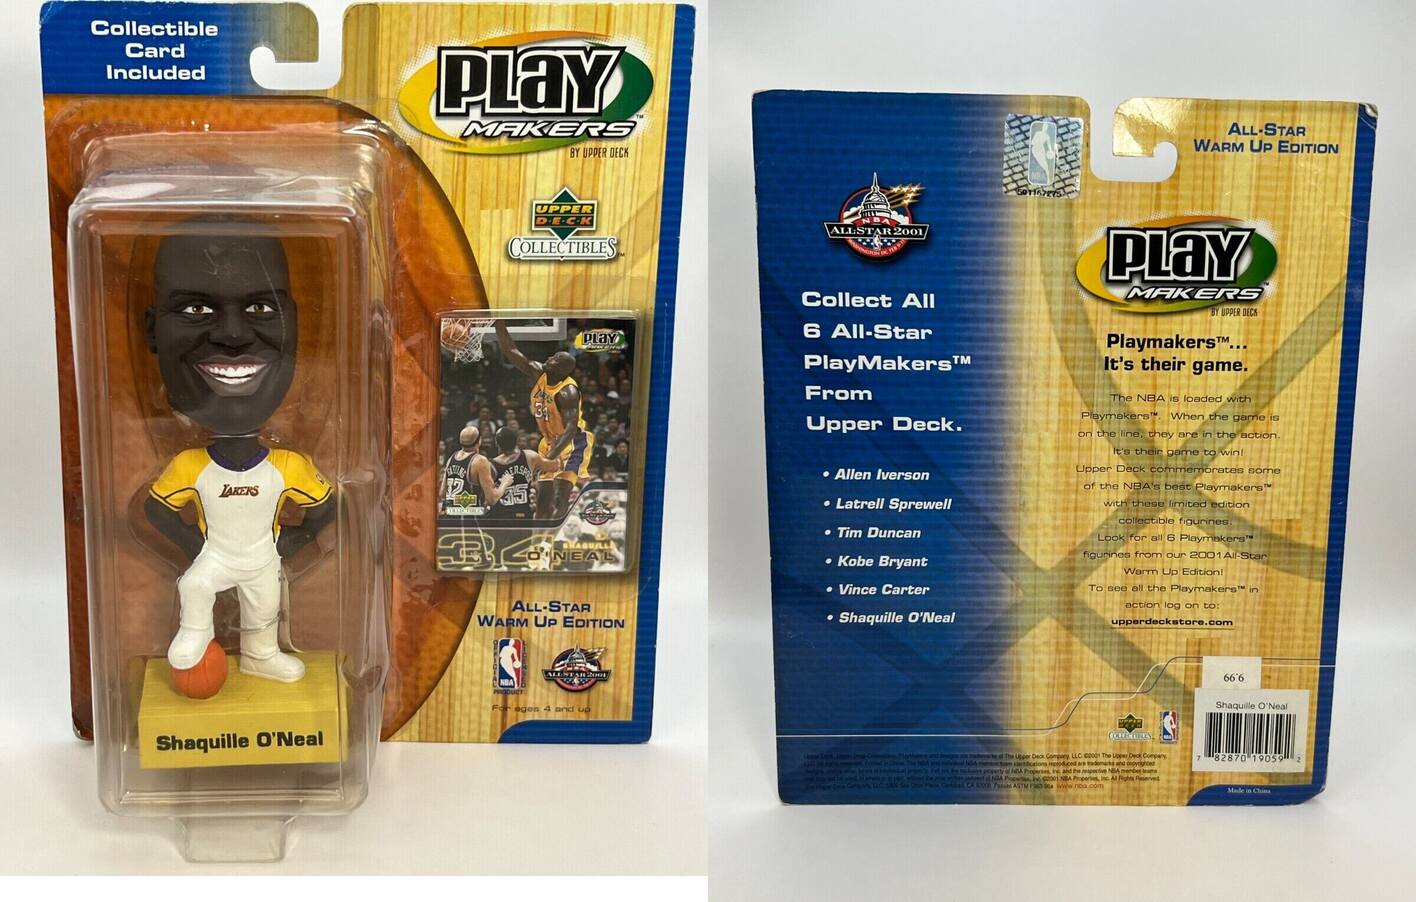 Shaquille O'Neal Lakers bobblehead